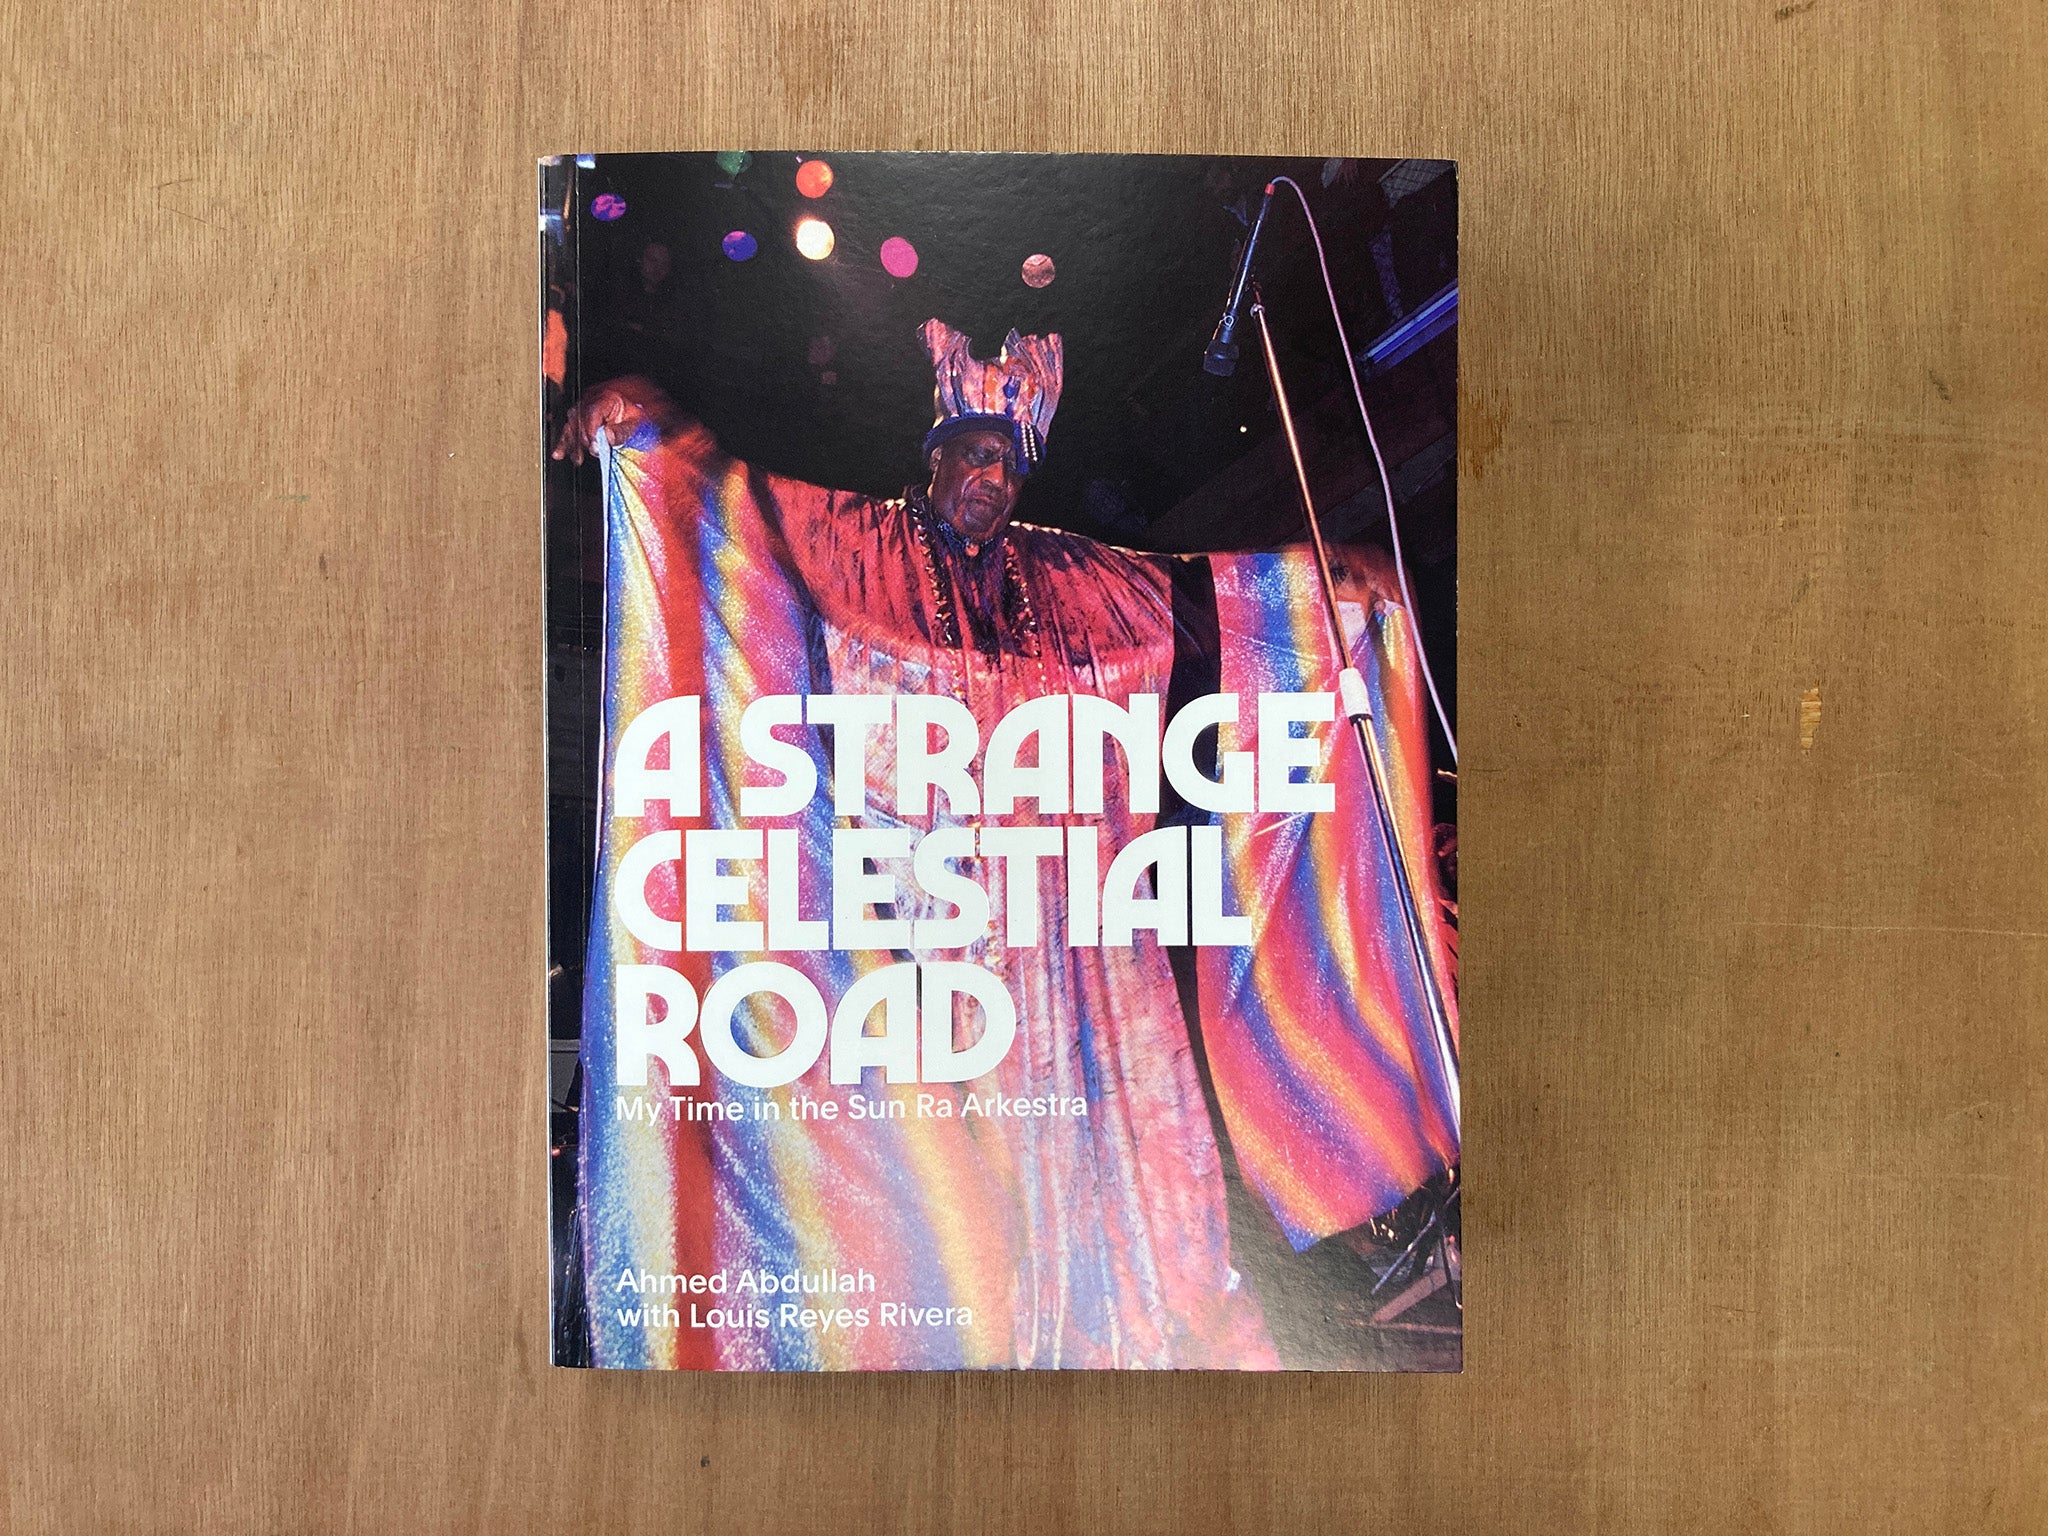 A STRANGE CELESTIAL ROAD – MY TIME IN THE SUN RA ARKESTRA by Ahmed Abdullah and Louis Reyes Rivera